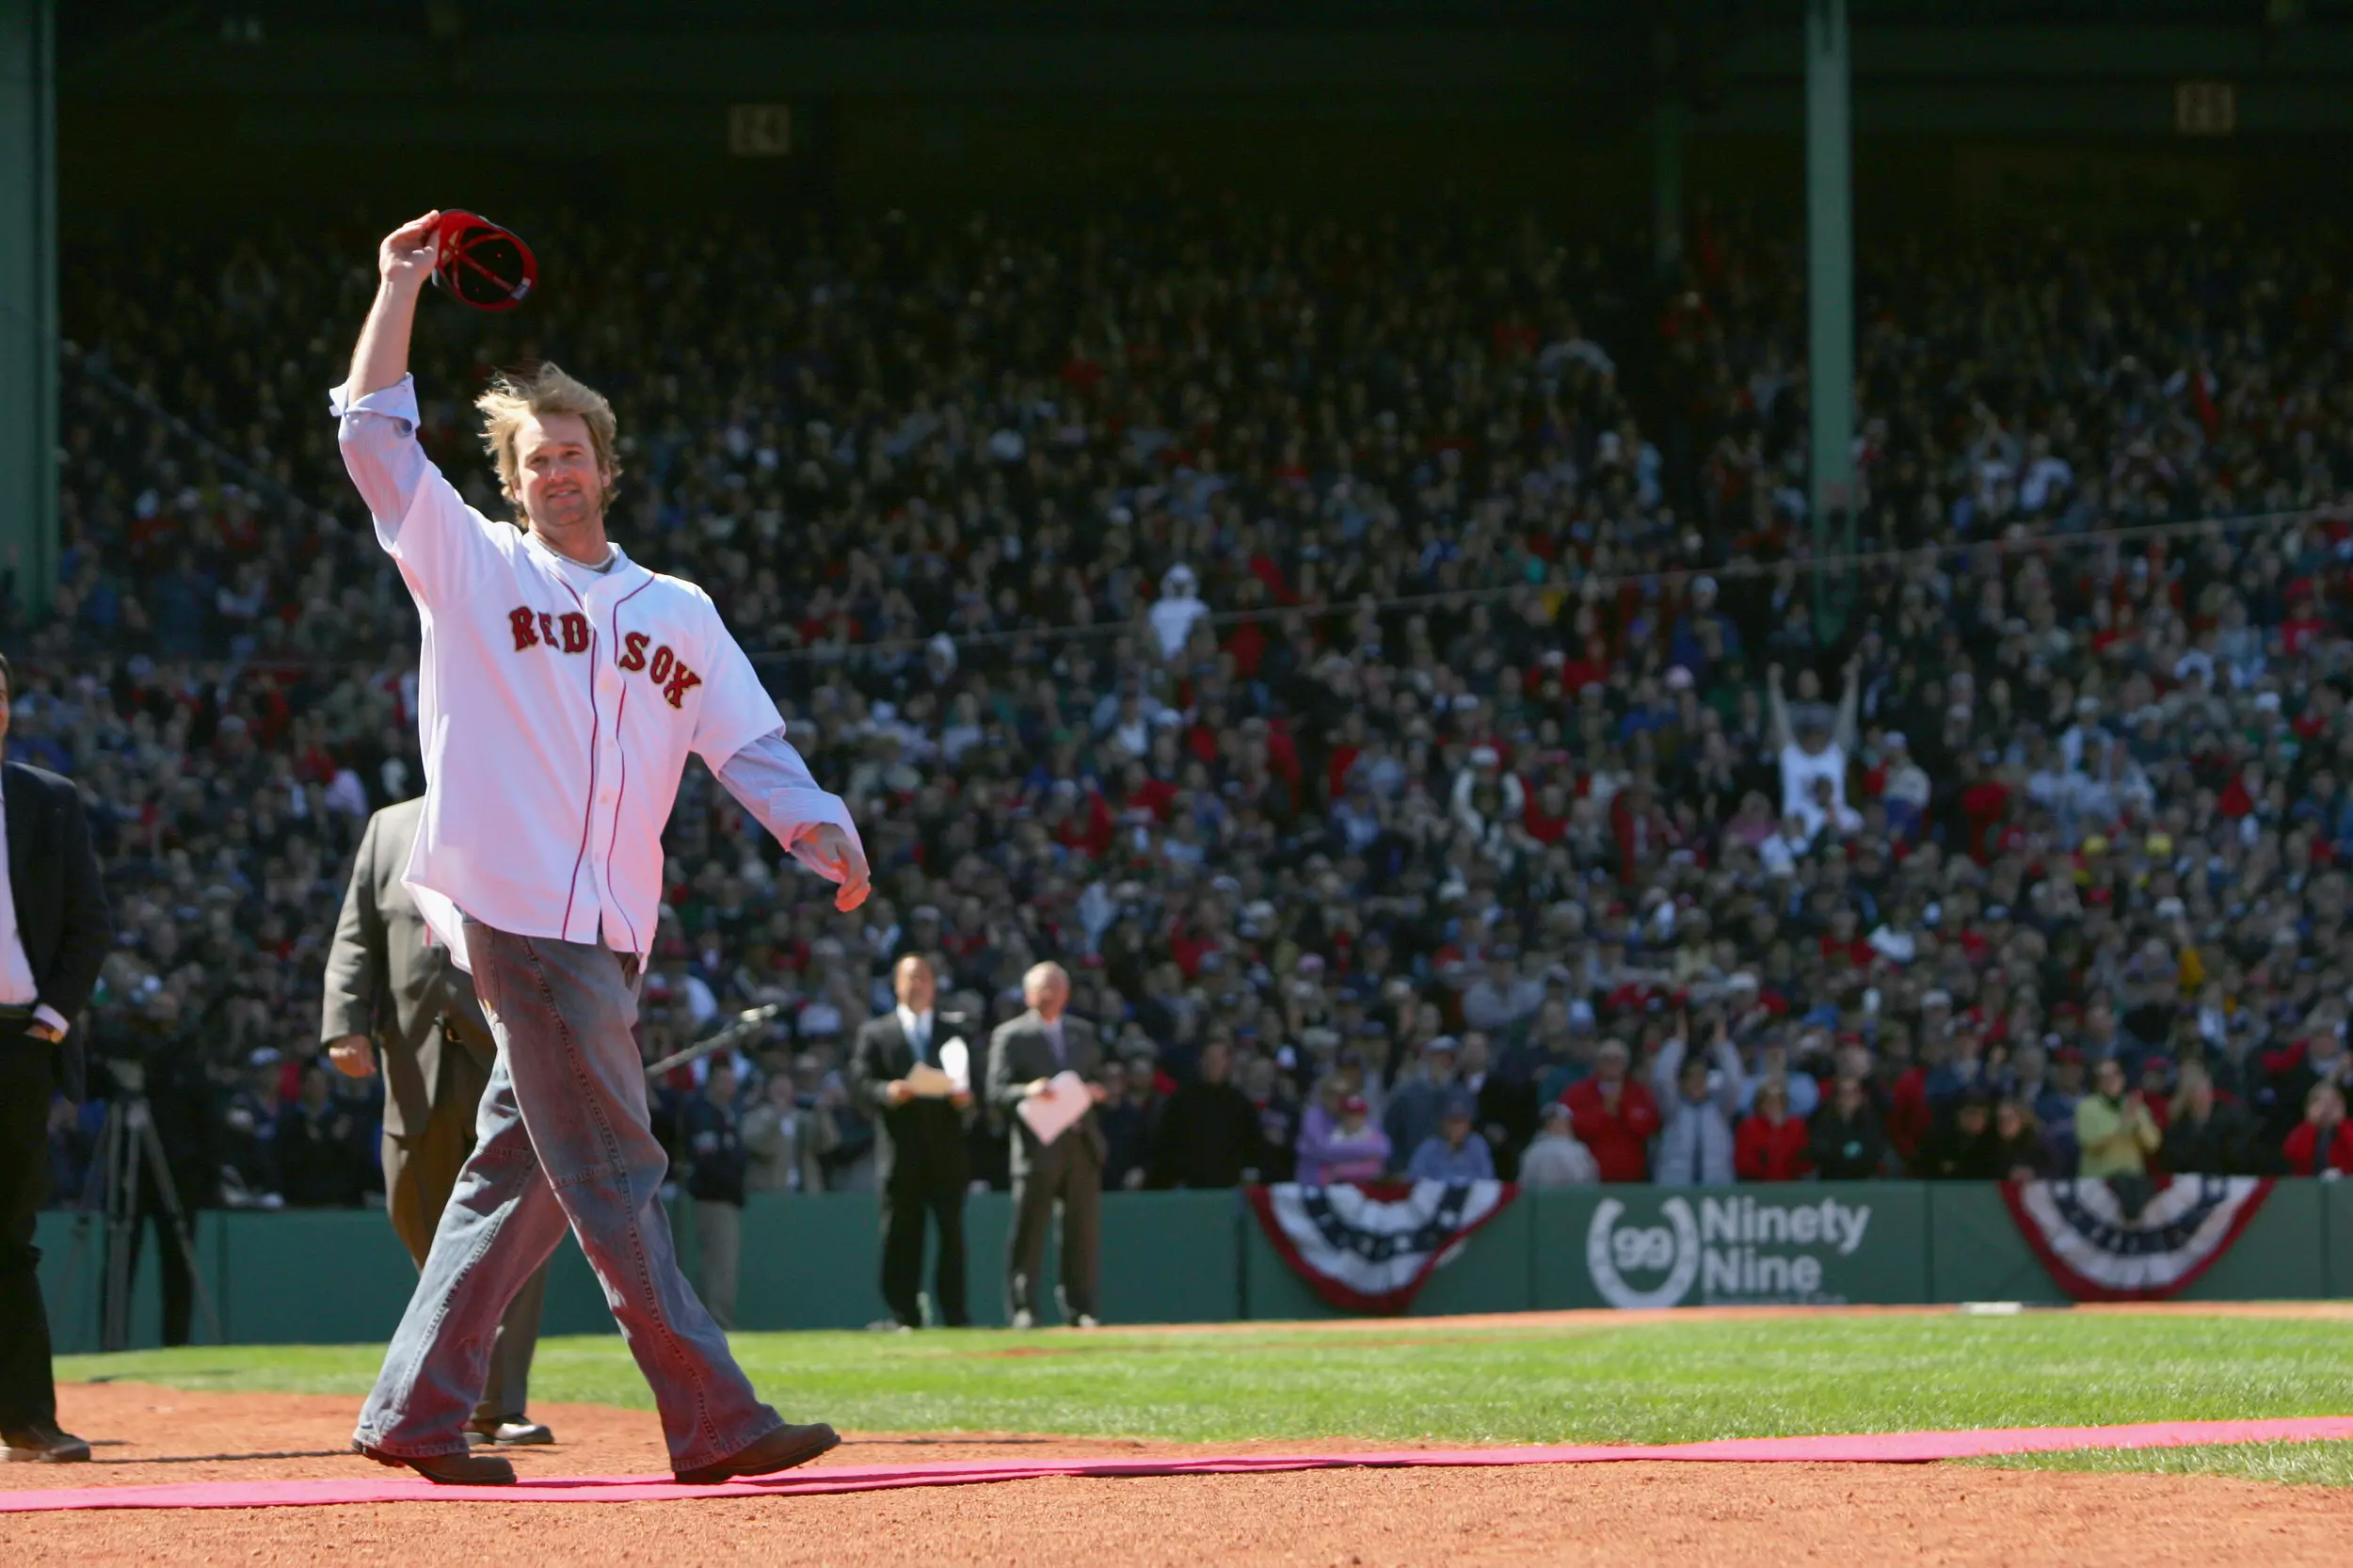 NESN to air Red Sox's 2013, 2004 World Series runs